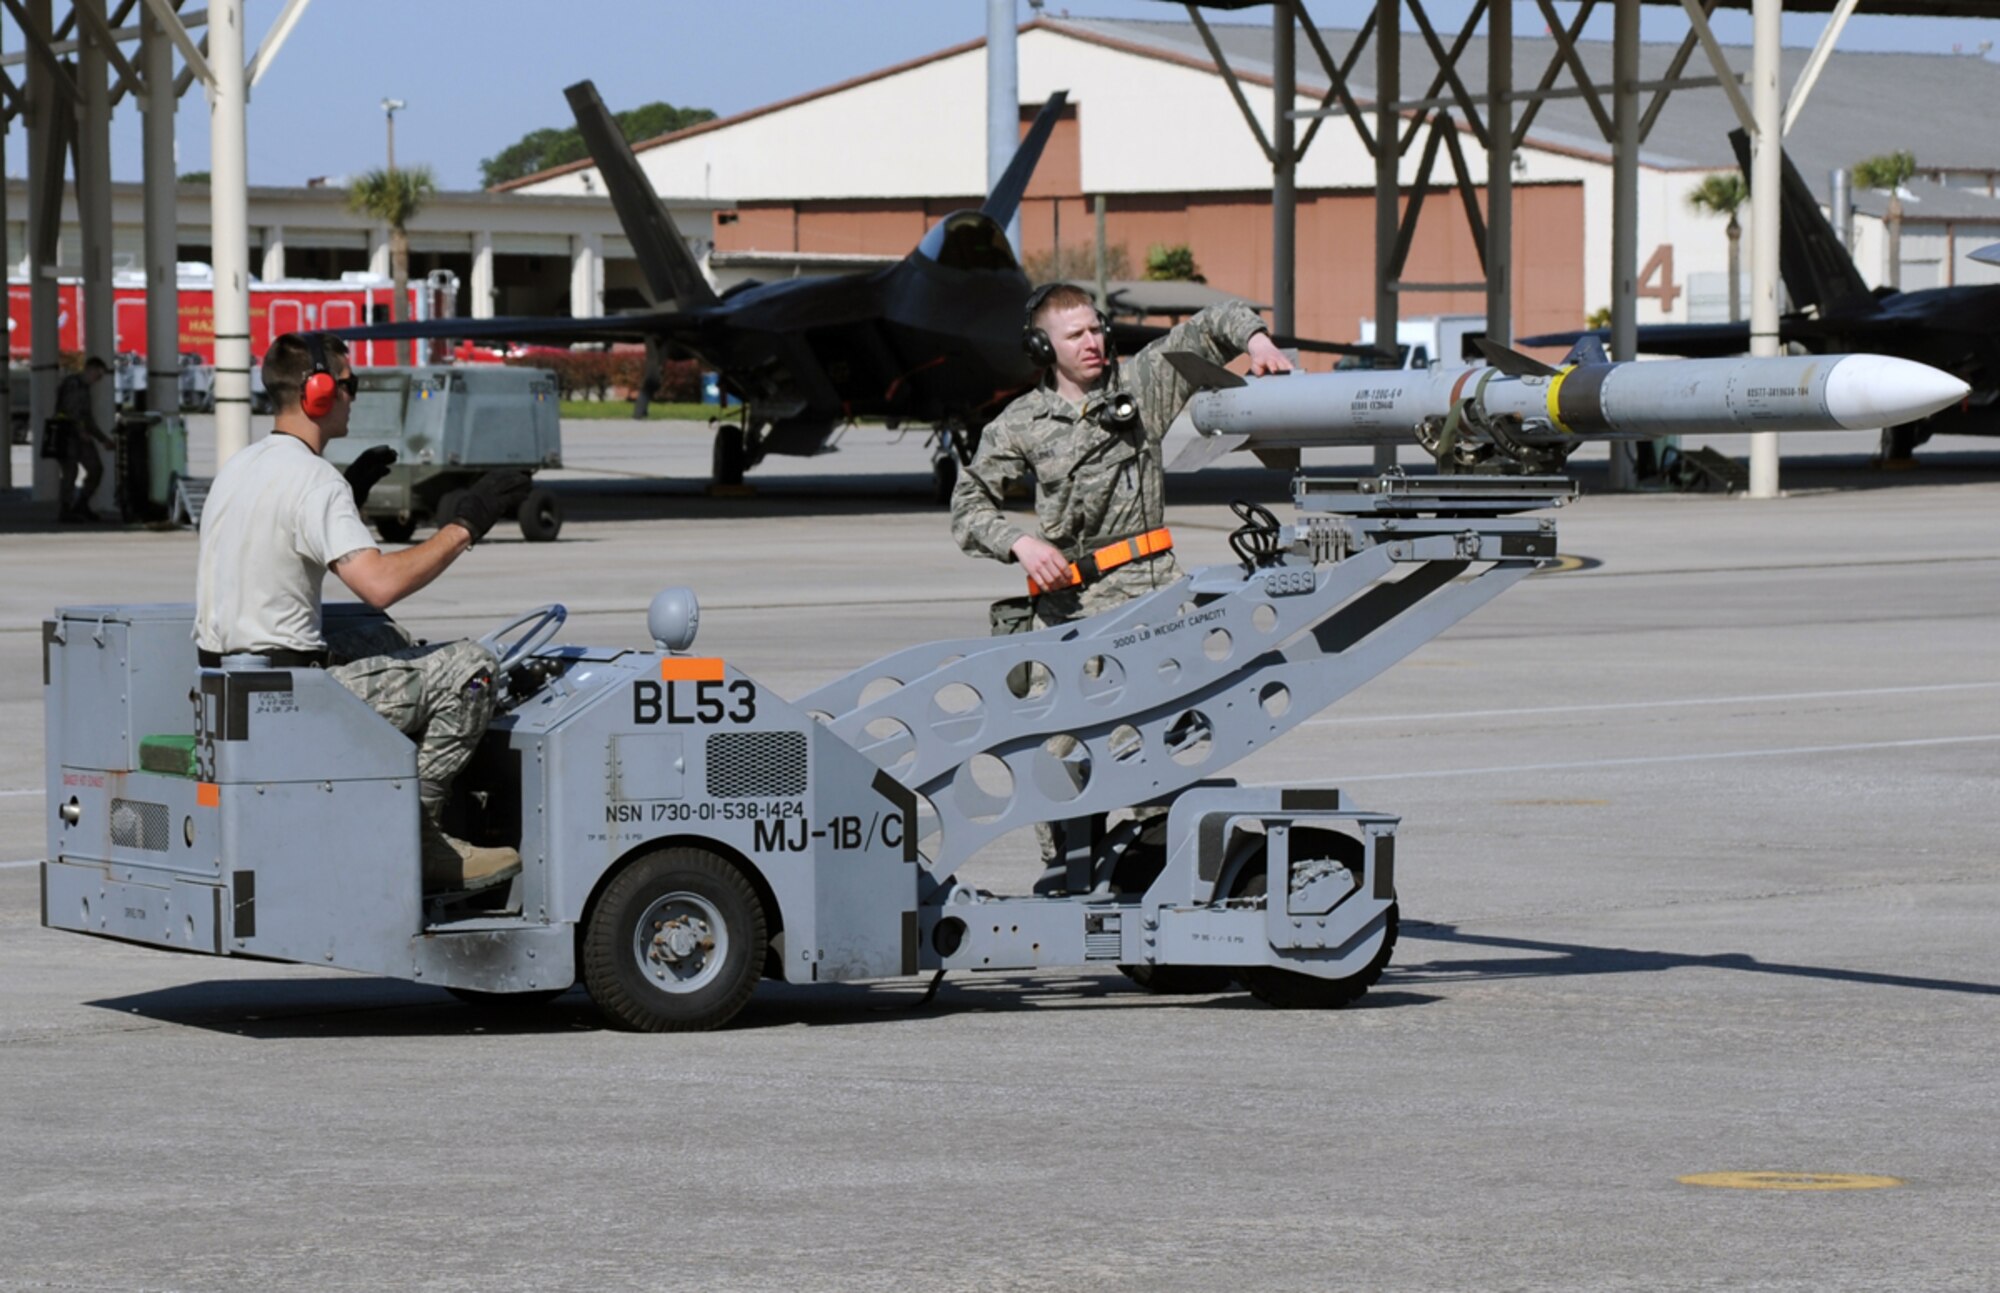 Senior Airman Andrew Messinger, left, and Air Force Staff Sgt. Michael Jones transport a missile across the flight line at Tyndall Air Force Base, Fla., March 26, 2014. Messinger is a member of the 3rd Aircraft Maintenance Squadron and Jones is a member of the 90th Aircraft Maintenance Unit out of Joint Base Elmendorf-Richardson, Alaska. (U.S. Air Force photo/Master Sgt. Scott Wilcox)